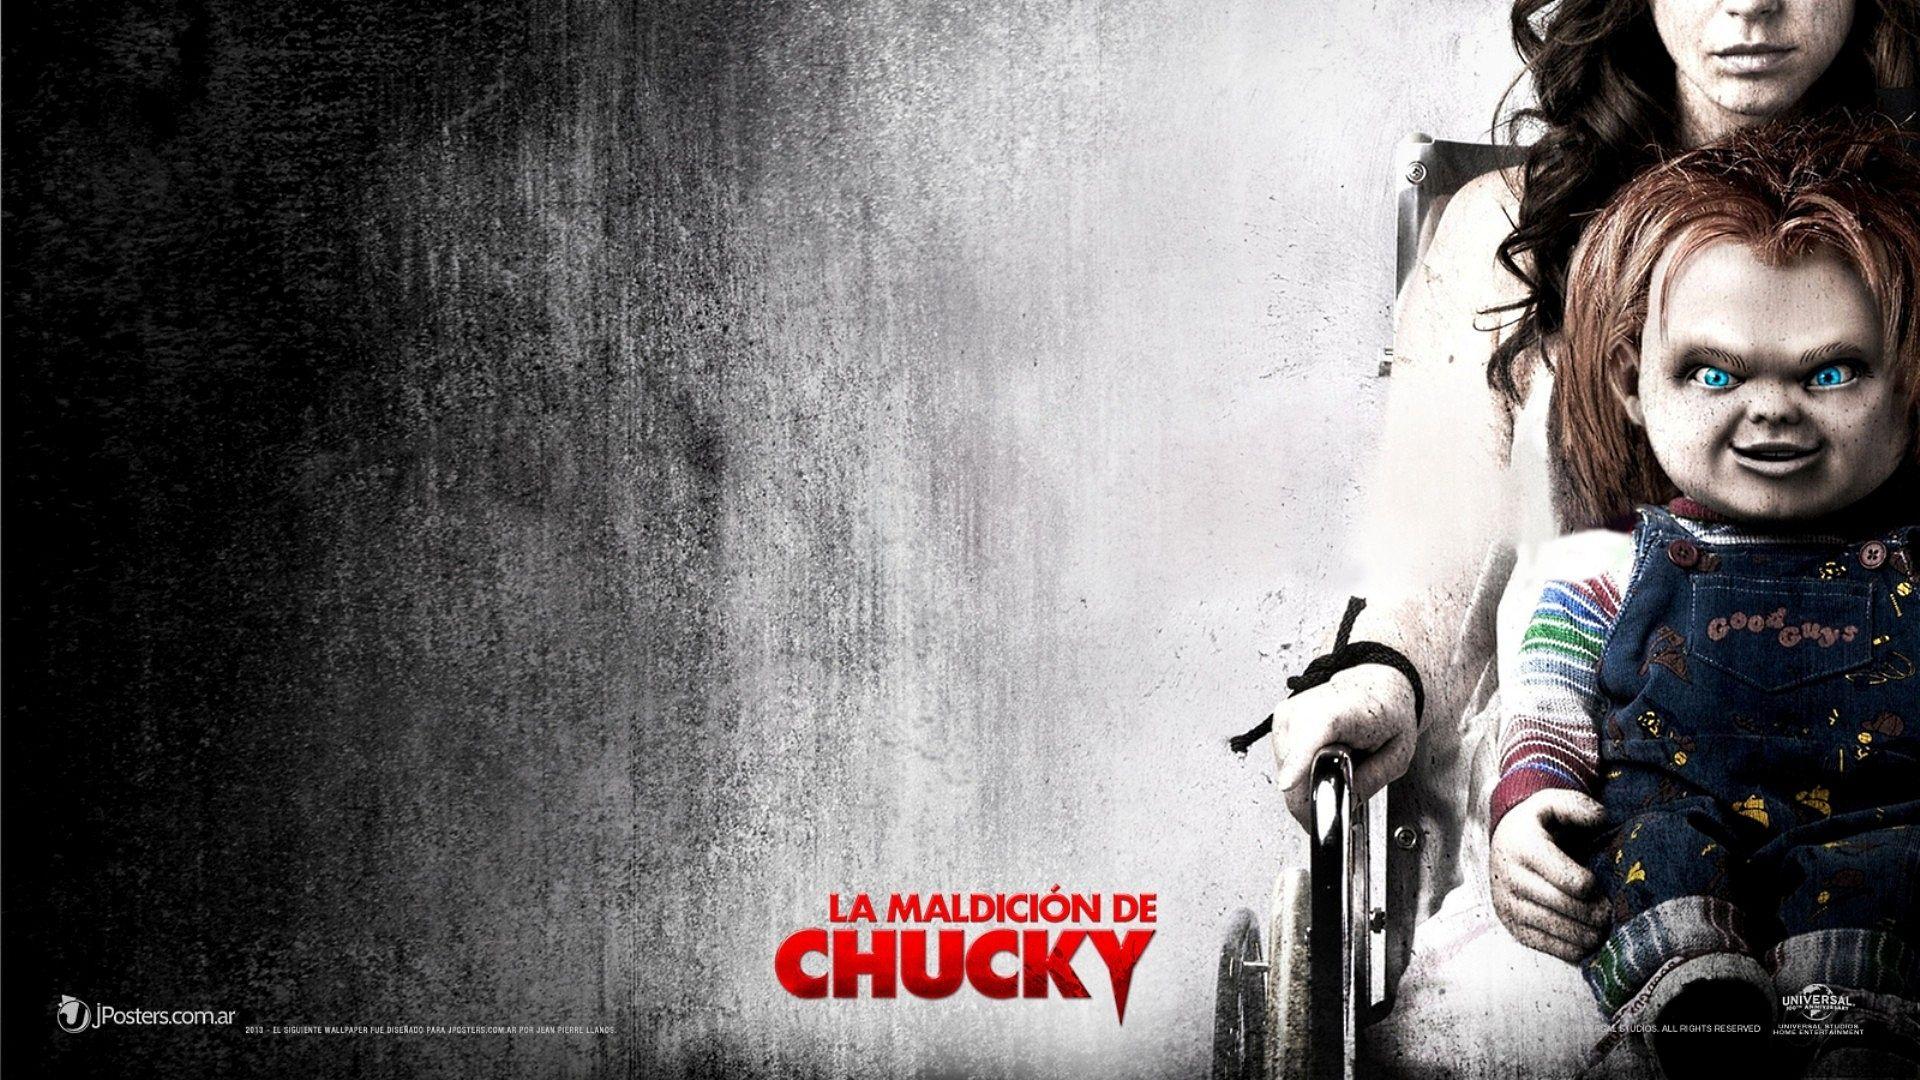 Chucky Wallpapers  Top 35 Best Chucky Wallpapers Download